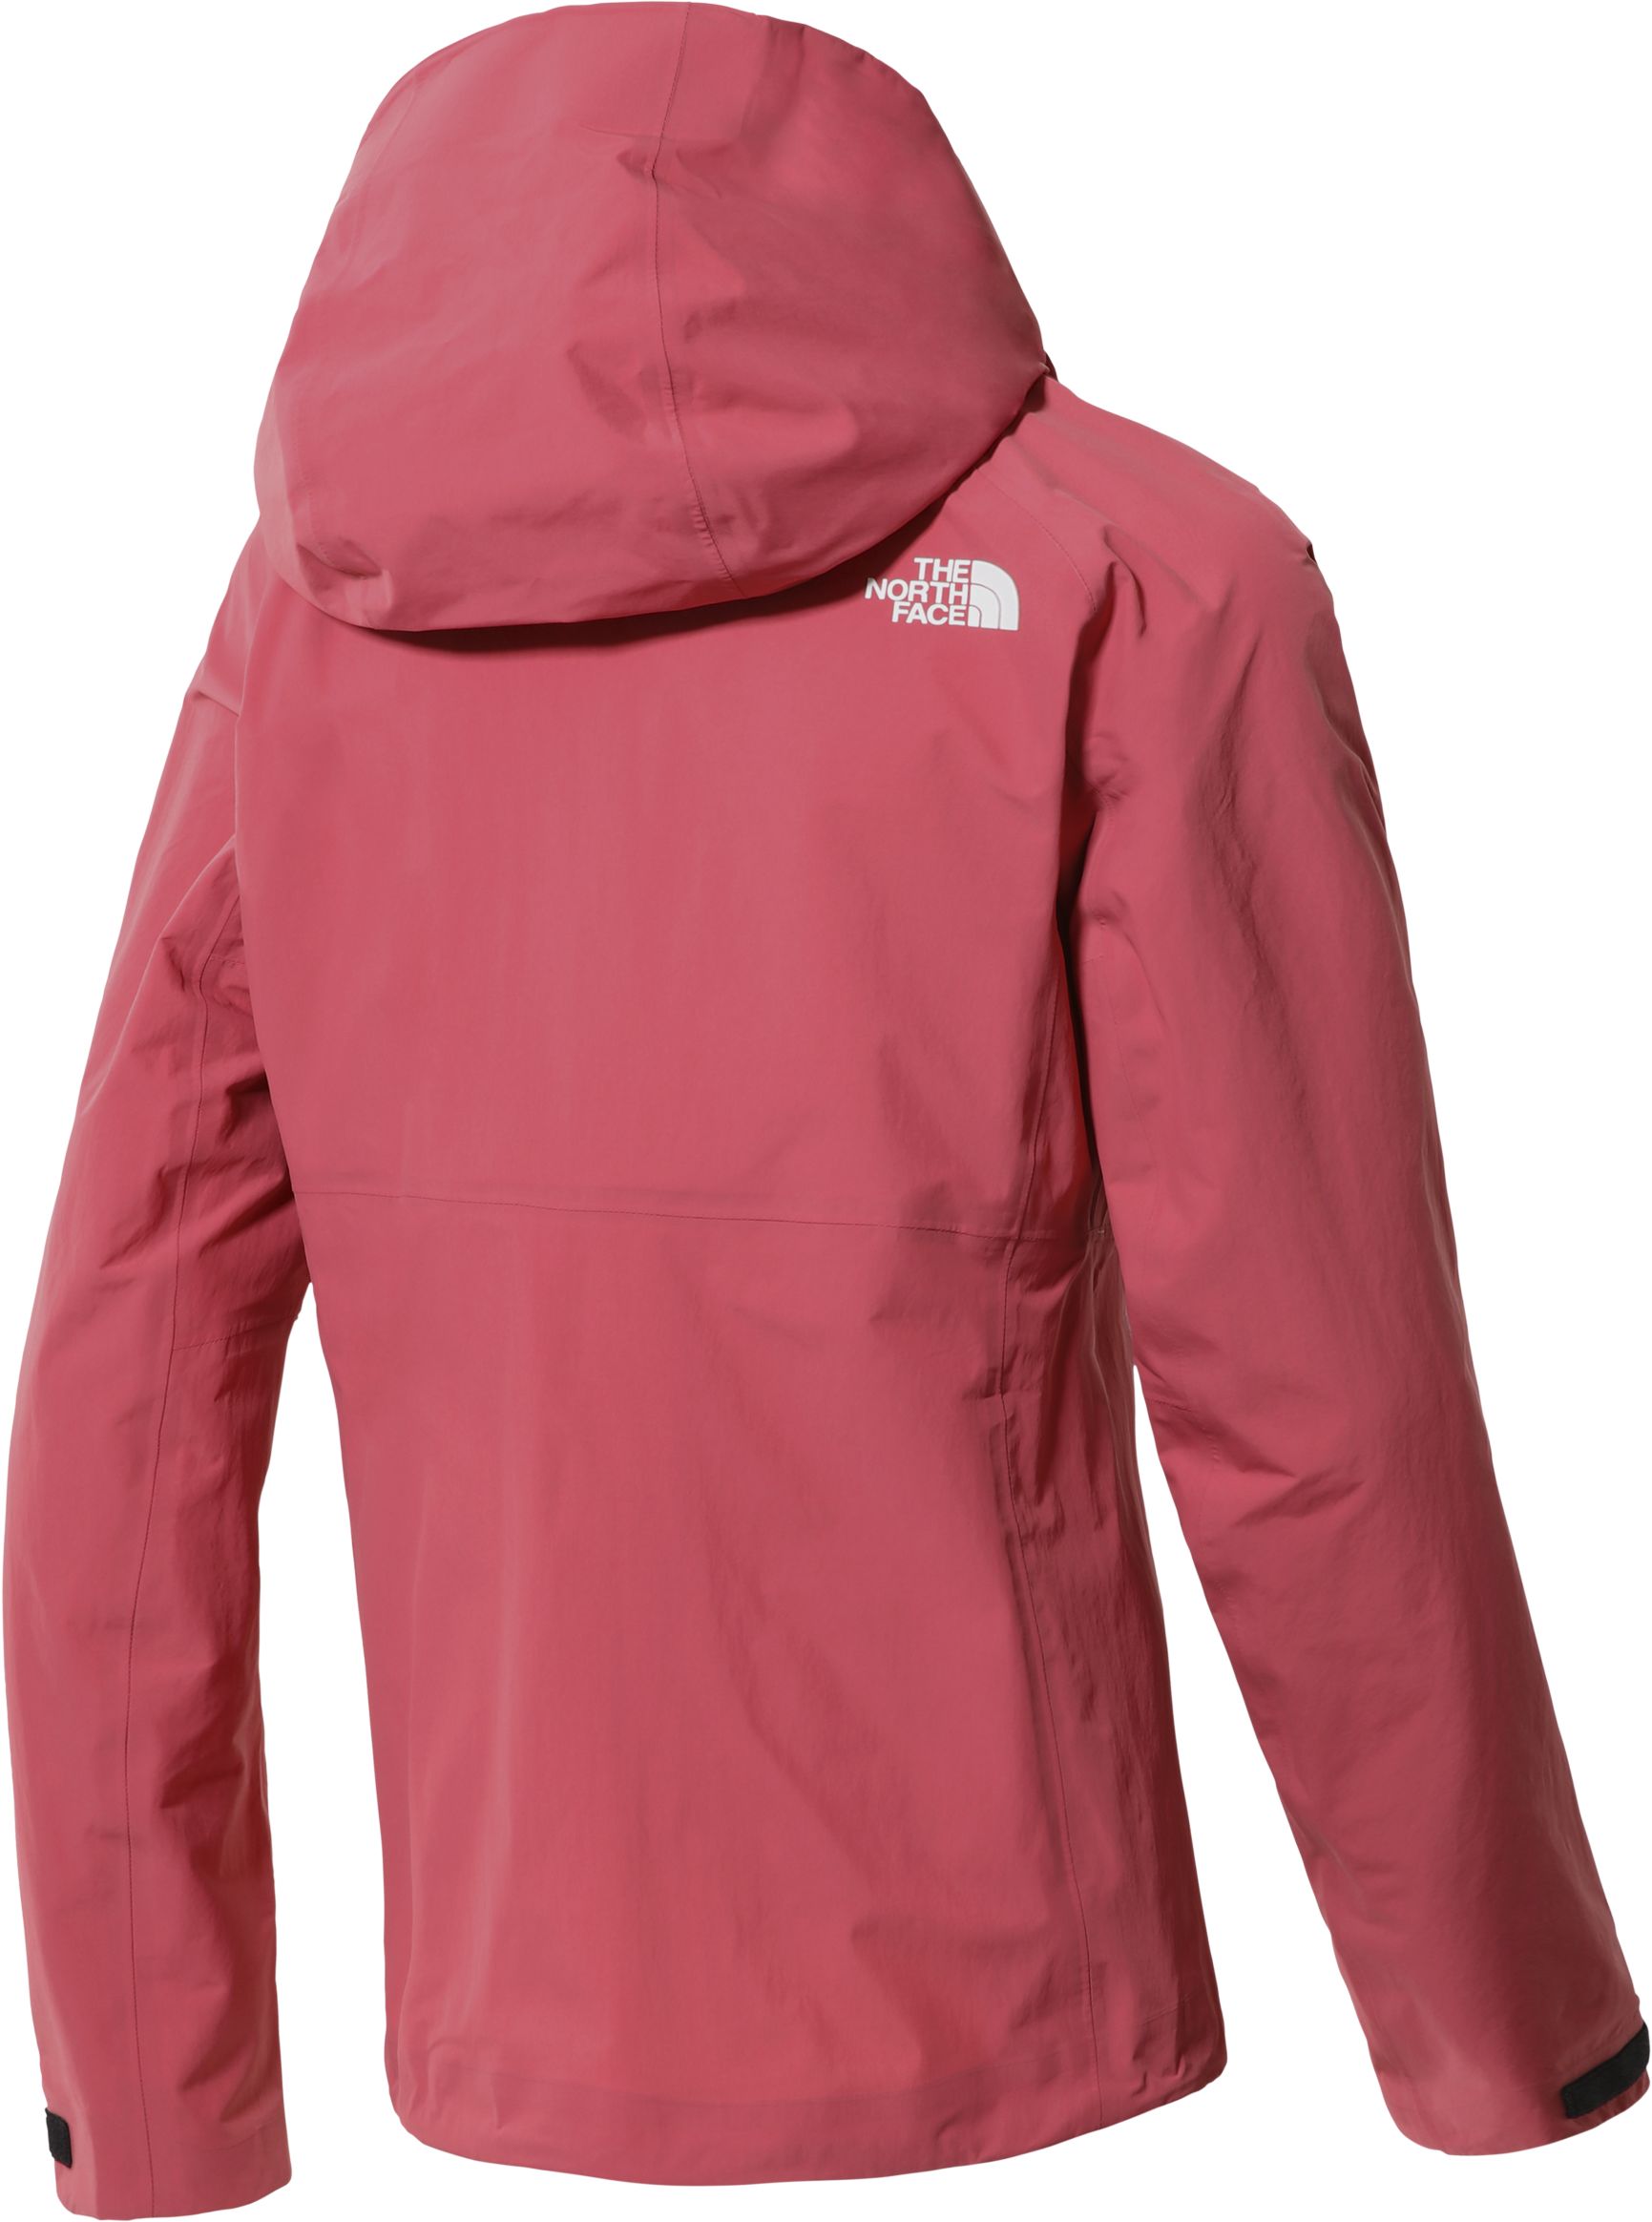 THE NORTH FACE, W CIRCADIAN 2.5L JACKET